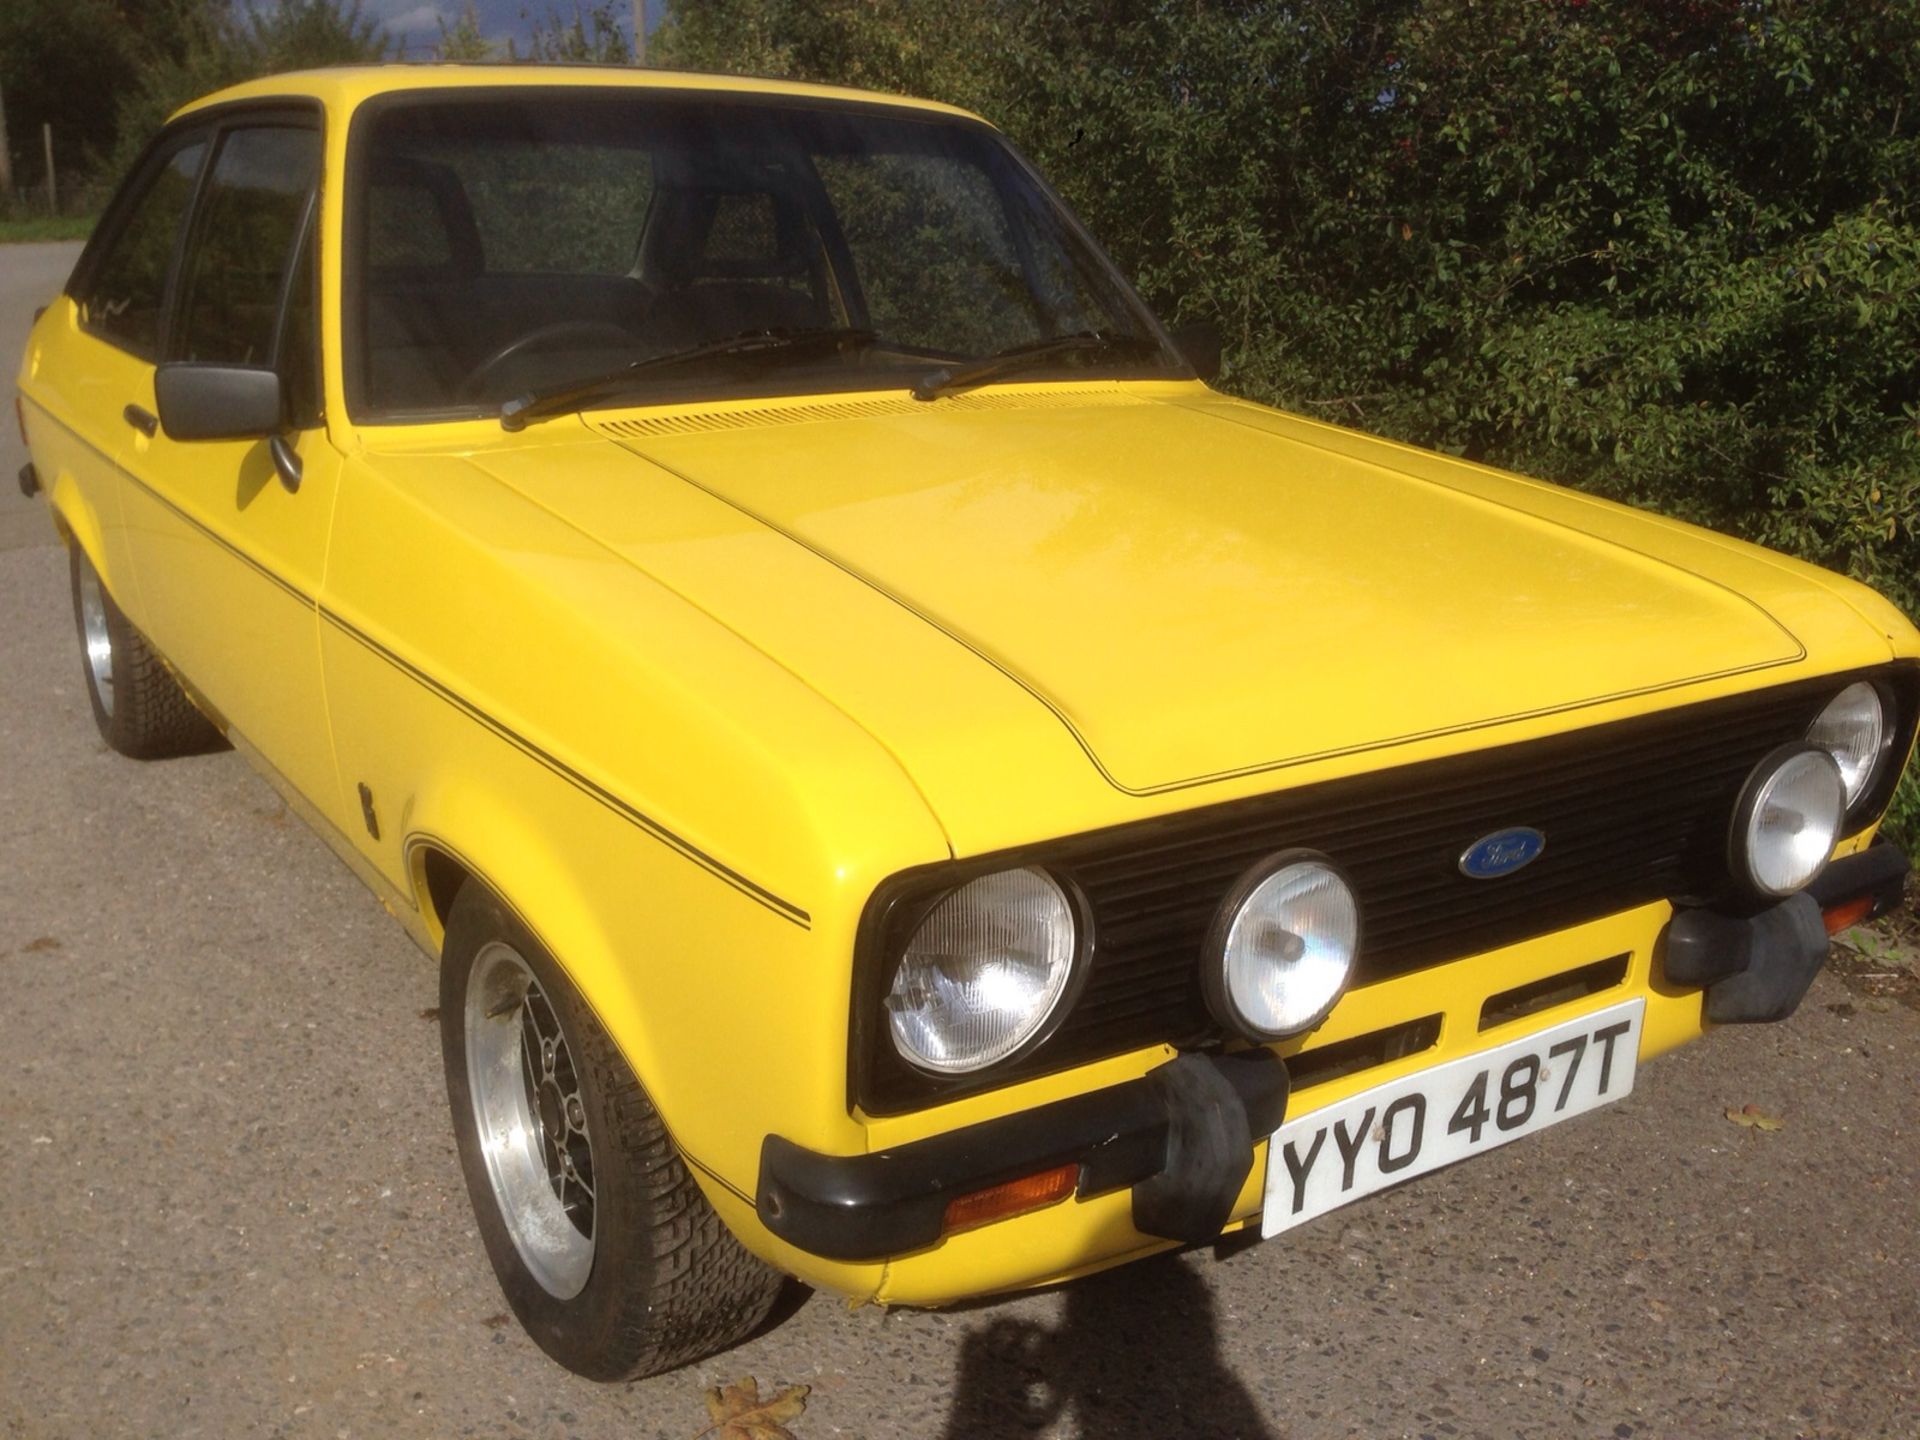 1979/T Ford Escort mk2 1600 Sport - in Signal yellow -  UK car  (545 miles) since rebuild - Image 8 of 54